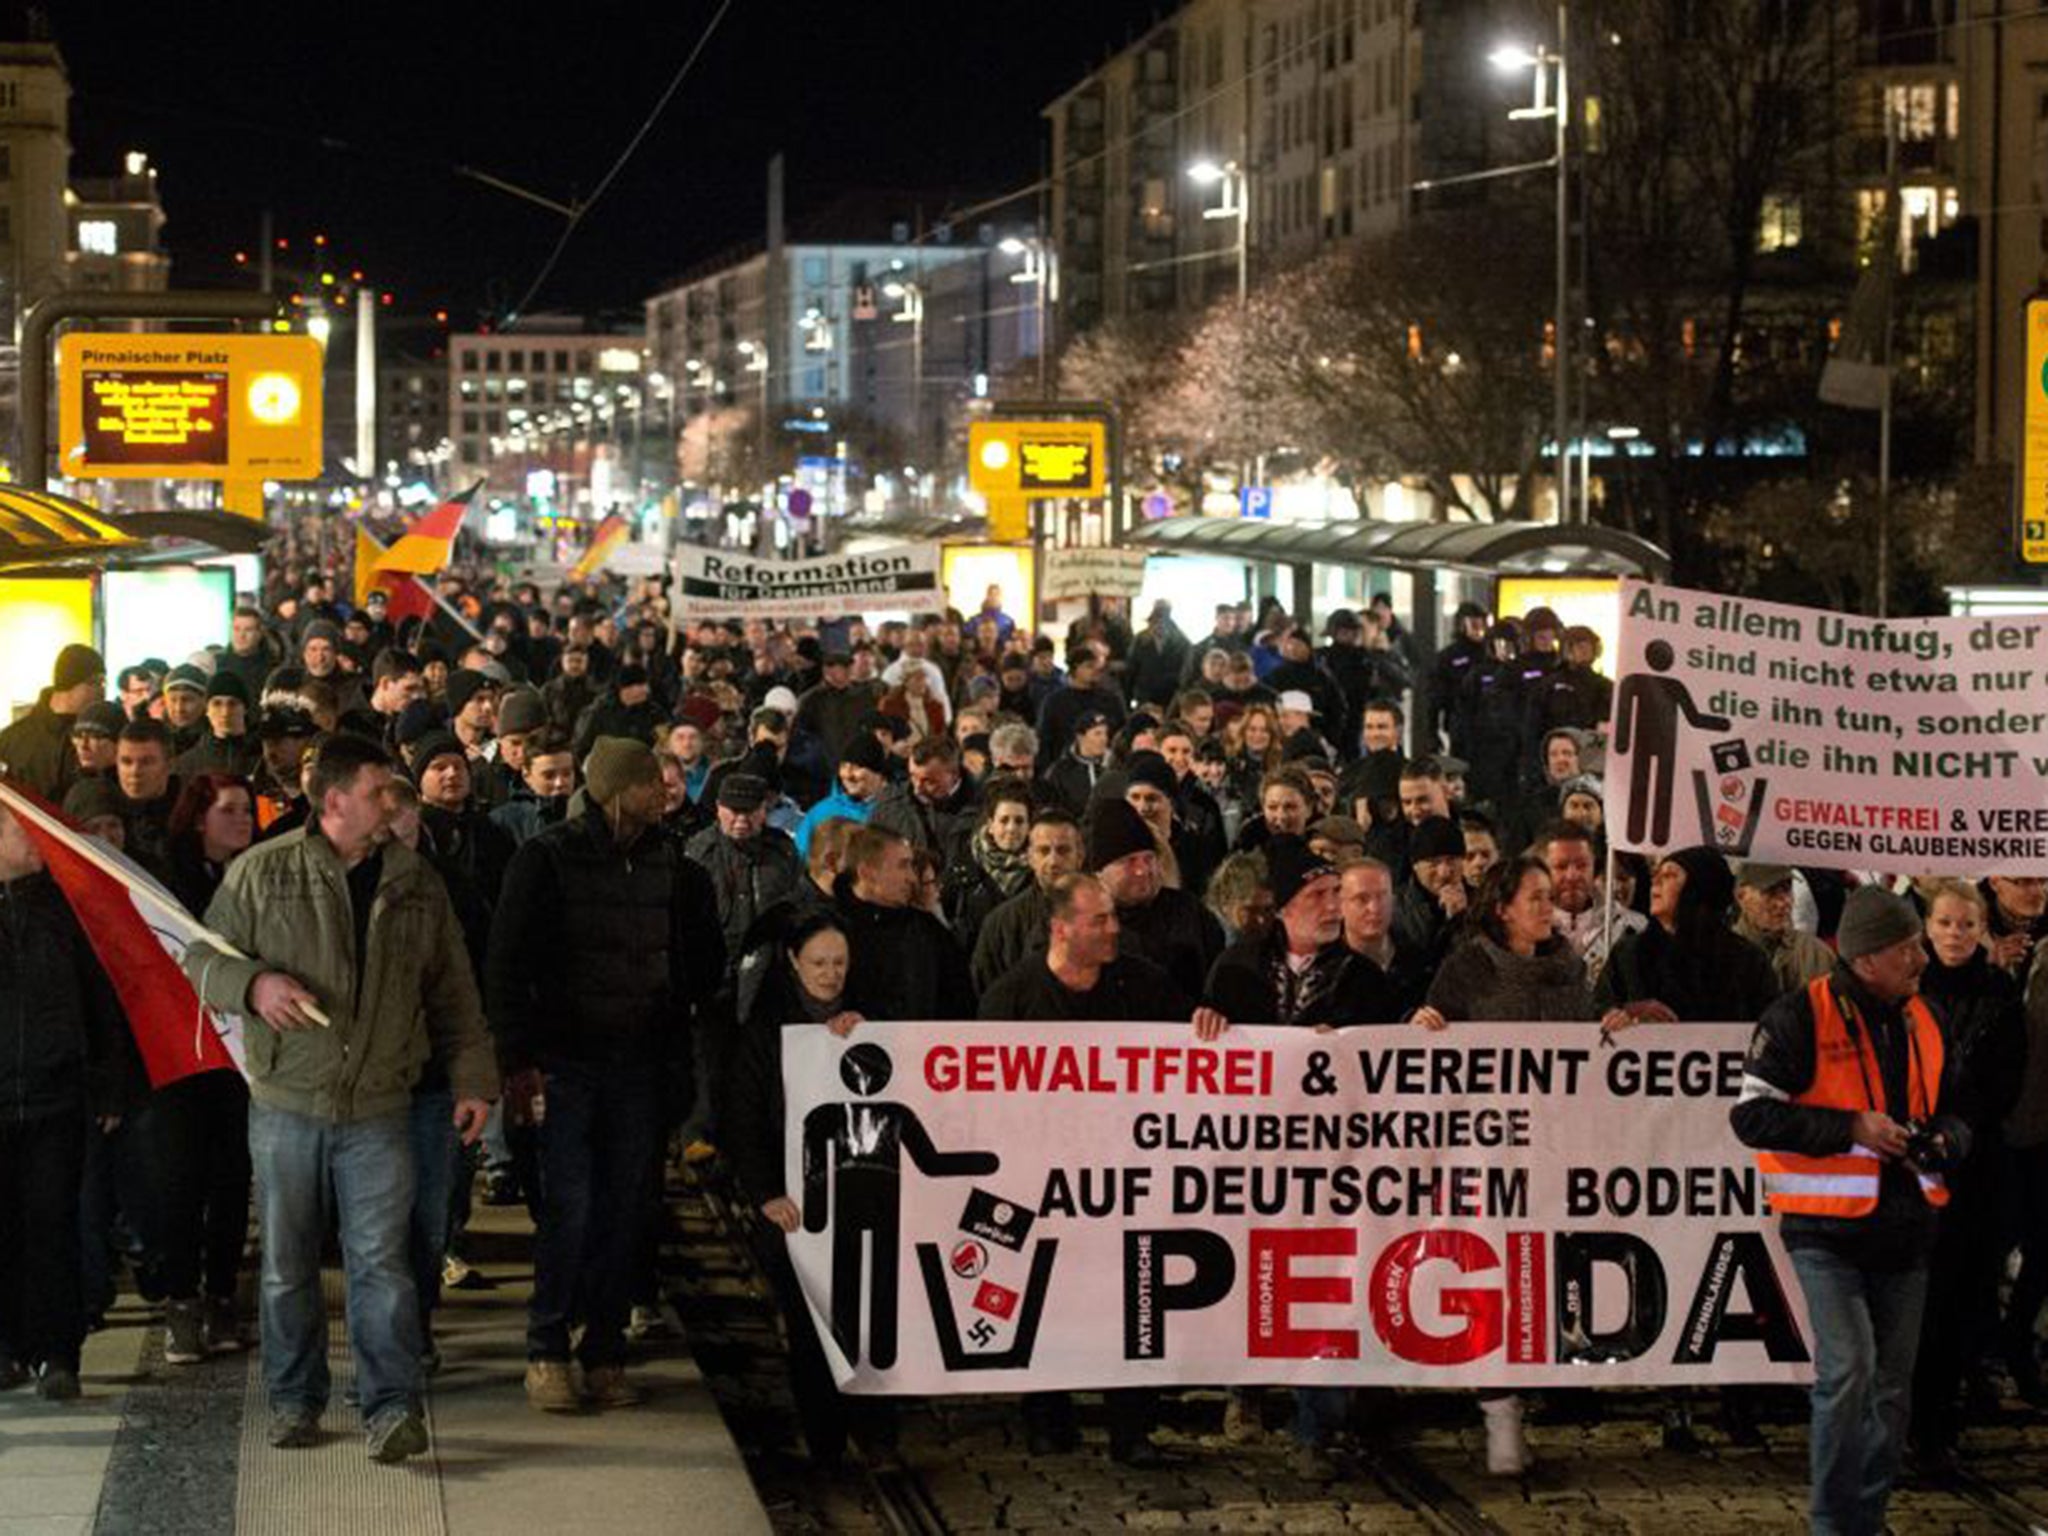 Pegida started out in mid- October with a demonstration in Dresden attended by about 200 supporters. On 22 December there were a record 17,500 in attendance (AFP)